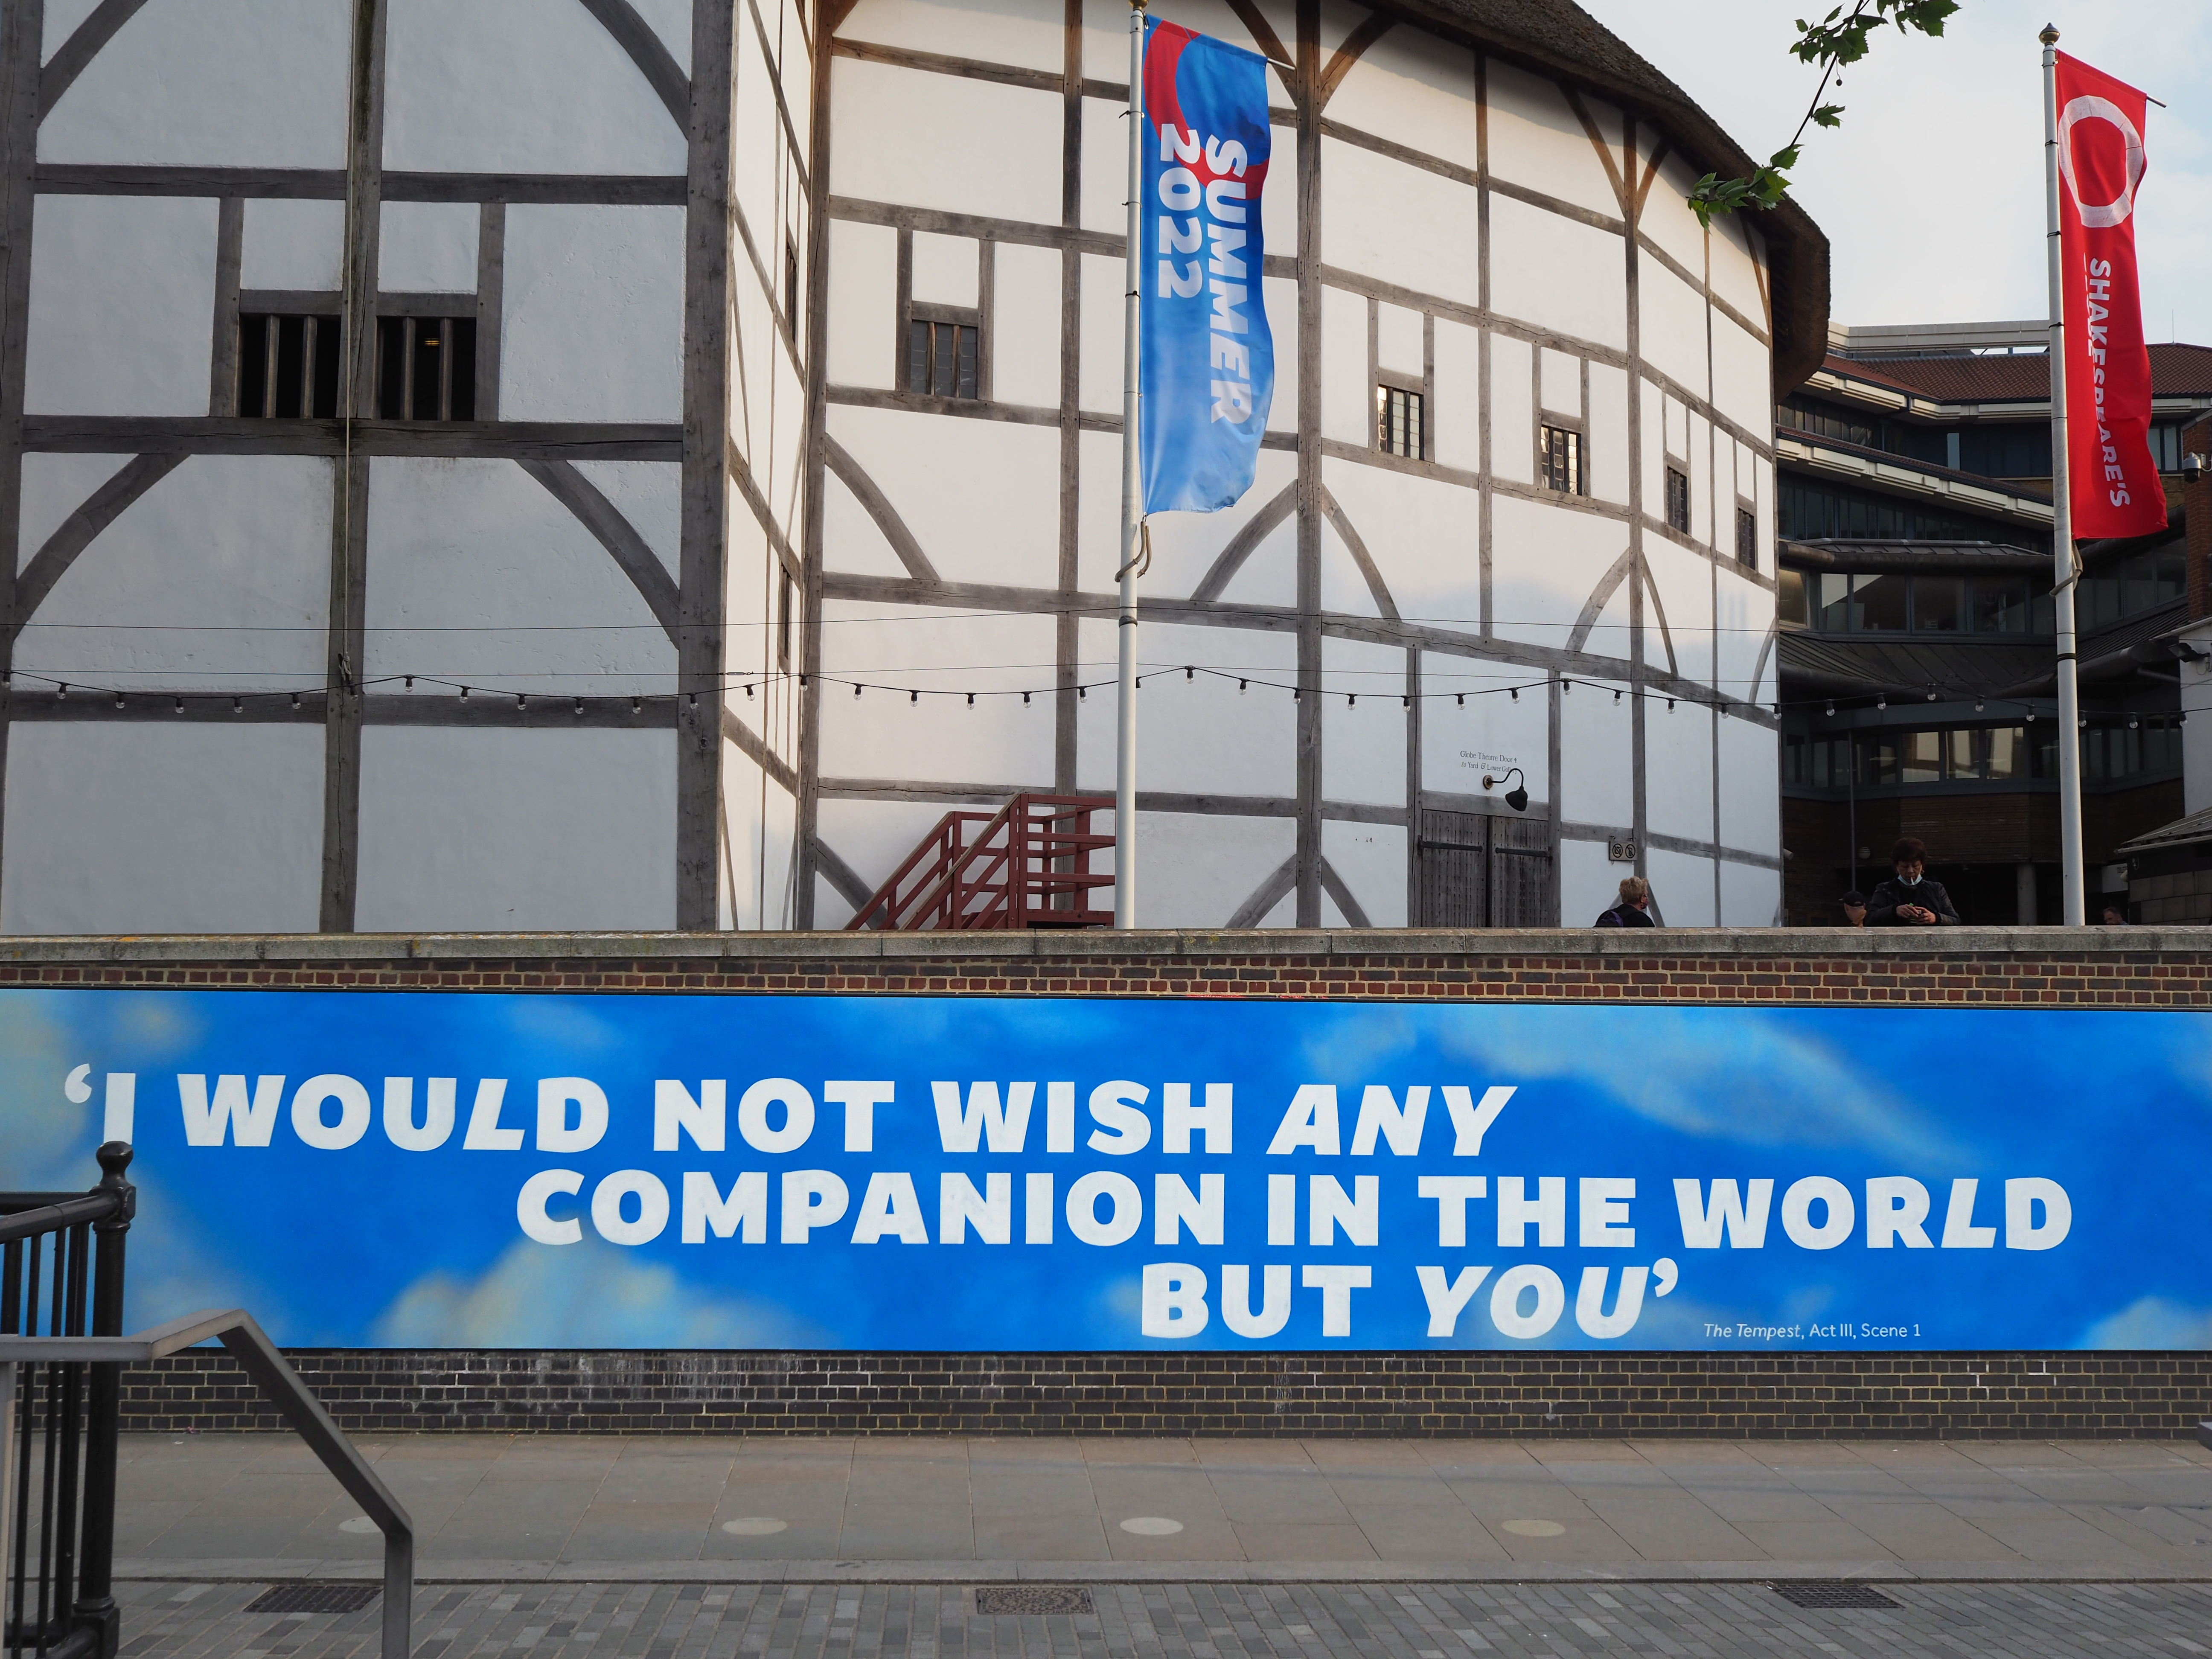 Amifer on a mural outside the Globe Theatre. The text says: I would not wish any companion in the world but you.